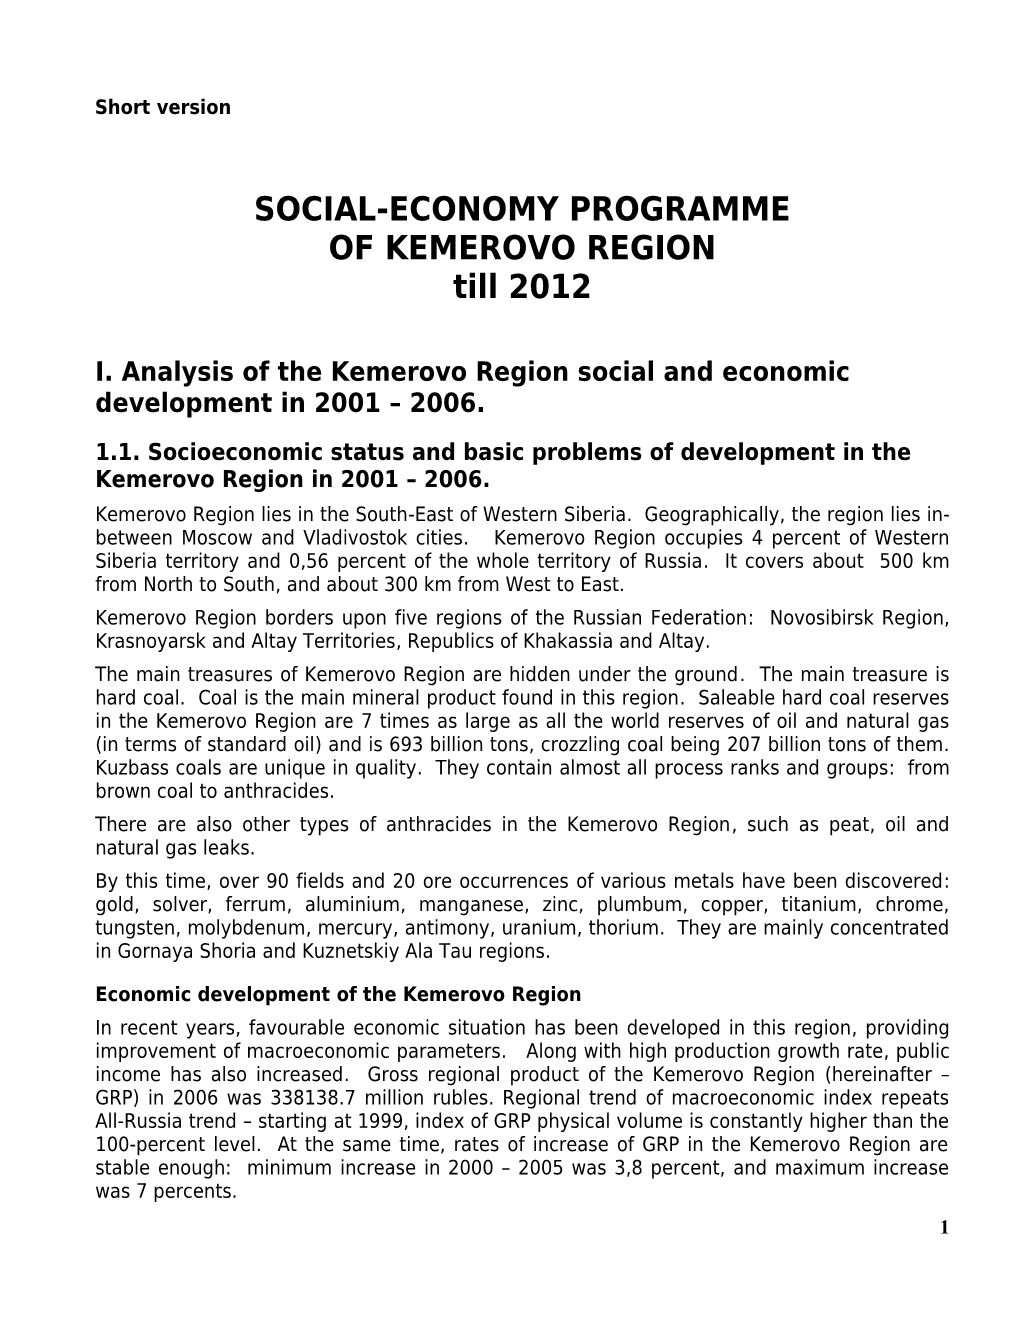 I.Analysis of the Kemerovo Region Social and Economic Development in 2001 2006